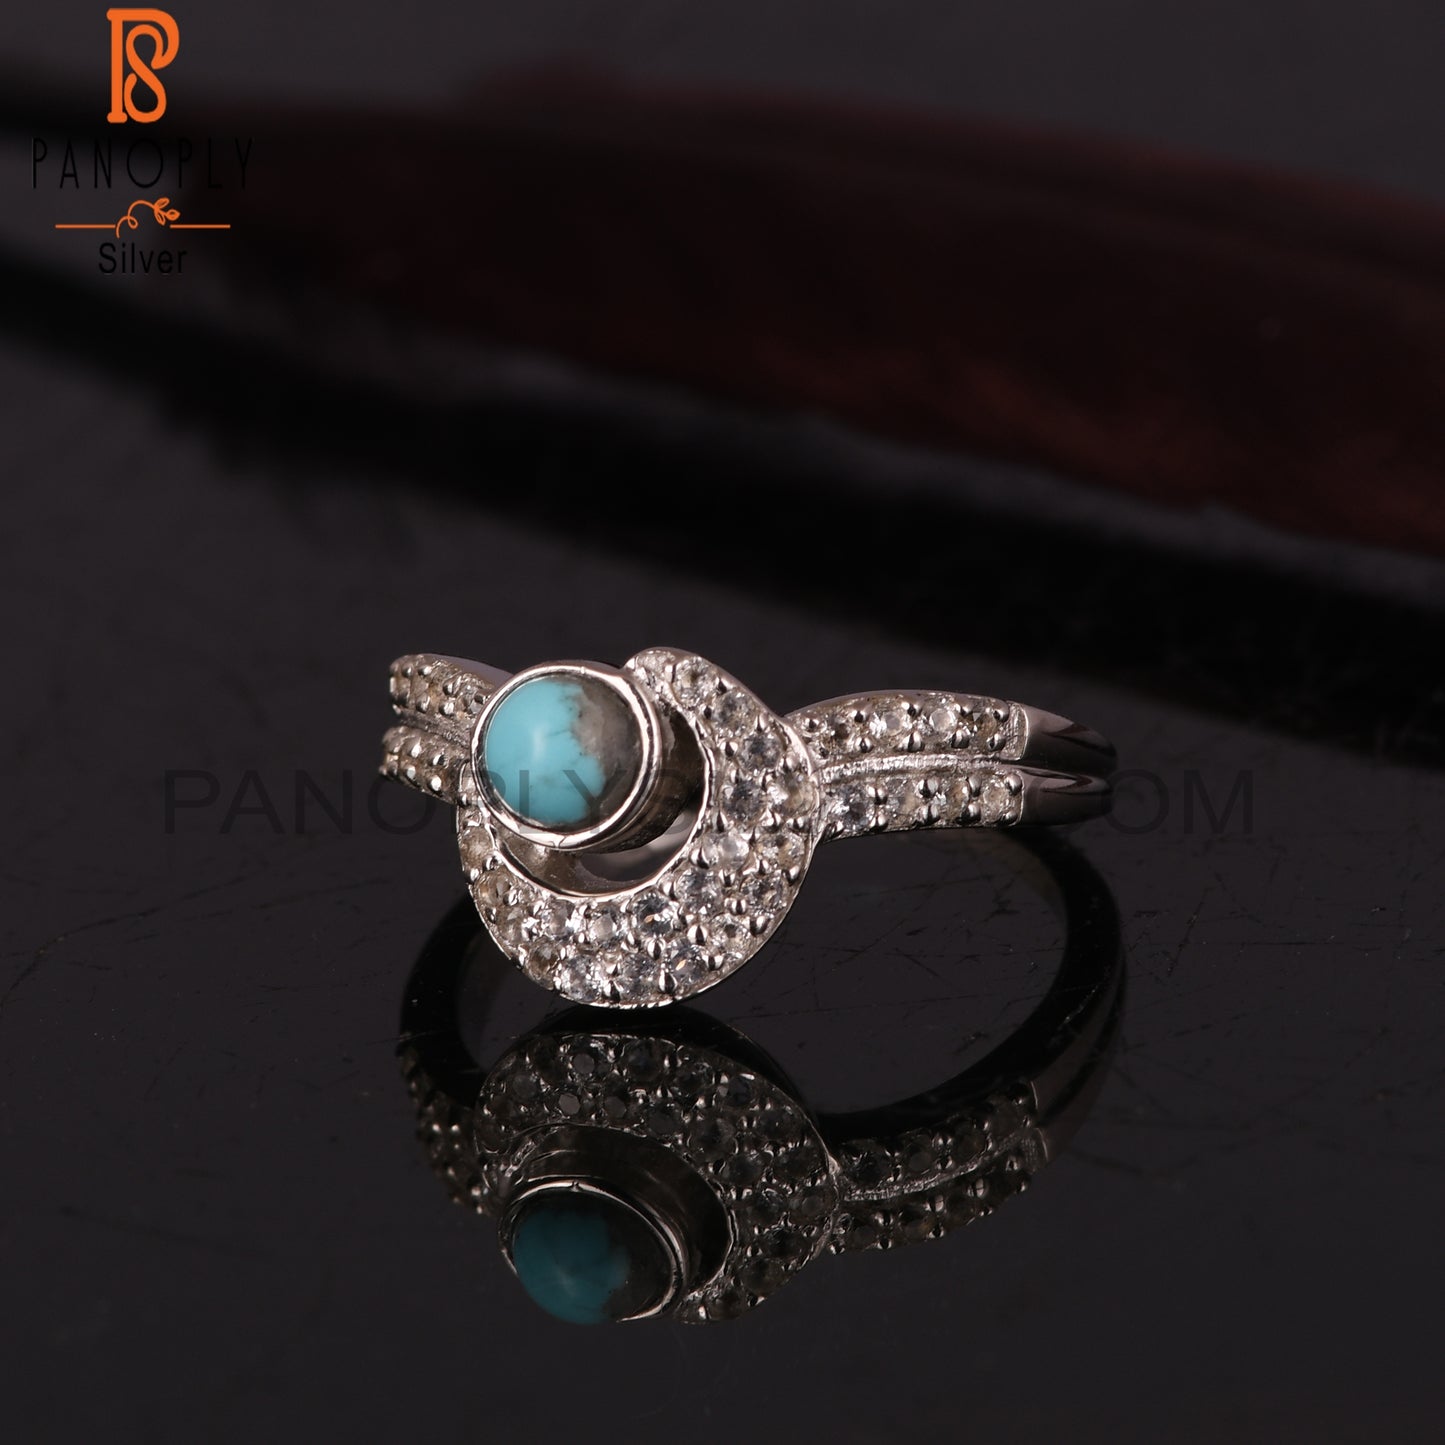 Arizona Turquoise, White Topaz 925 Sterling Silver Rings